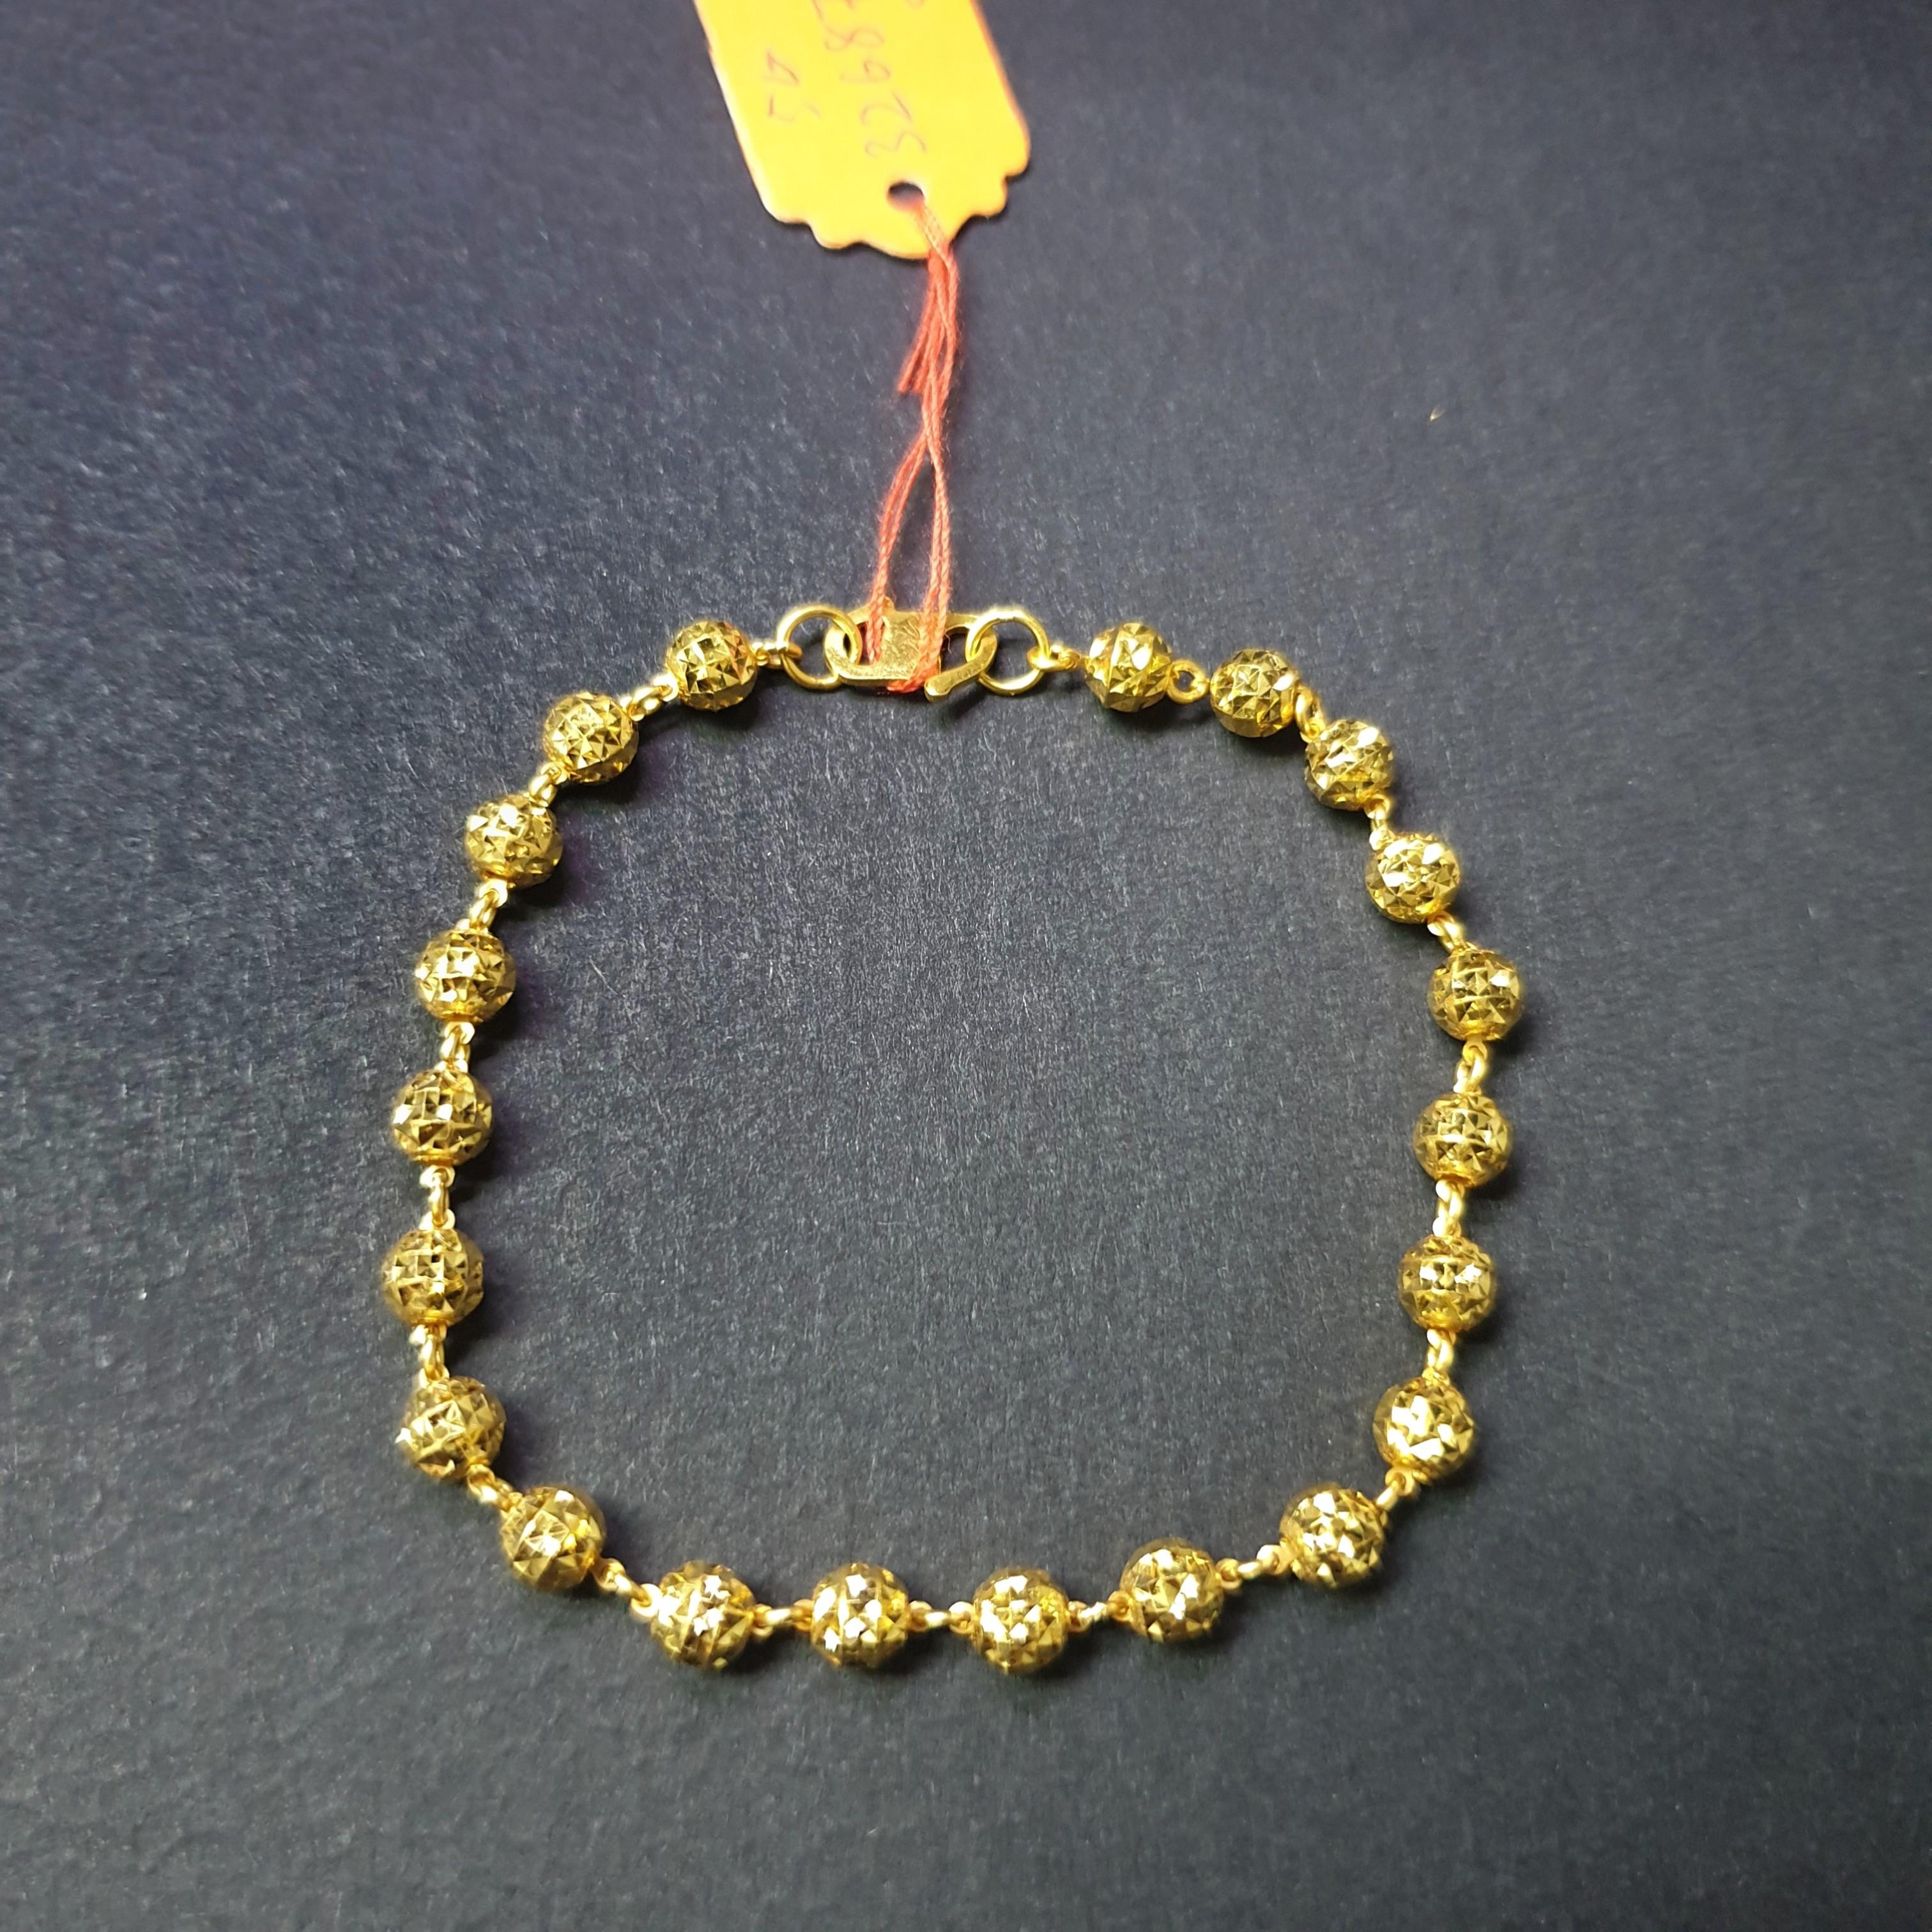 Bracelets | Gold Filled Just the beads (singles) - The Callaway Collection